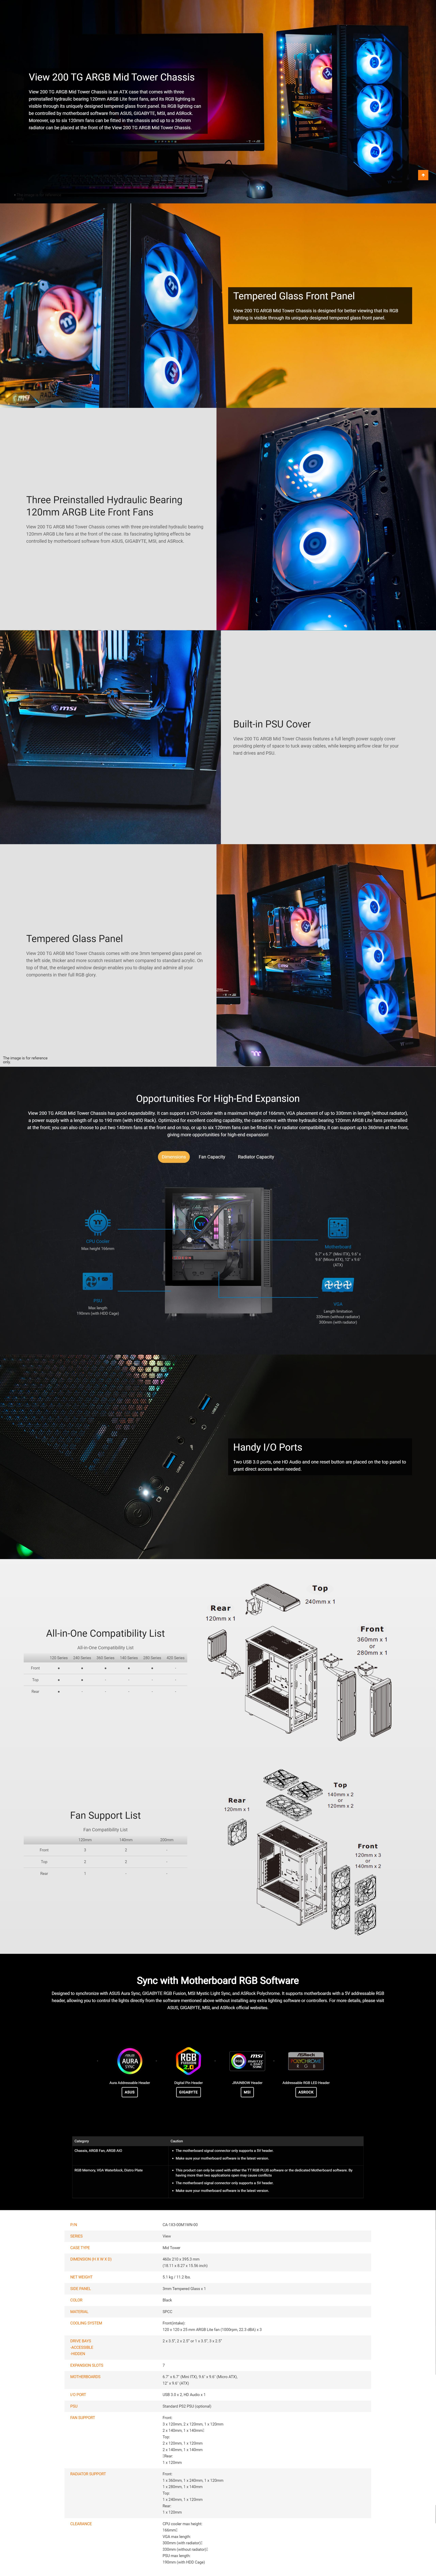 A large marketing image providing additional information about the product Thermaltake View 200 - ARGB Mid Tower Case (Black) - Additional alt info not provided